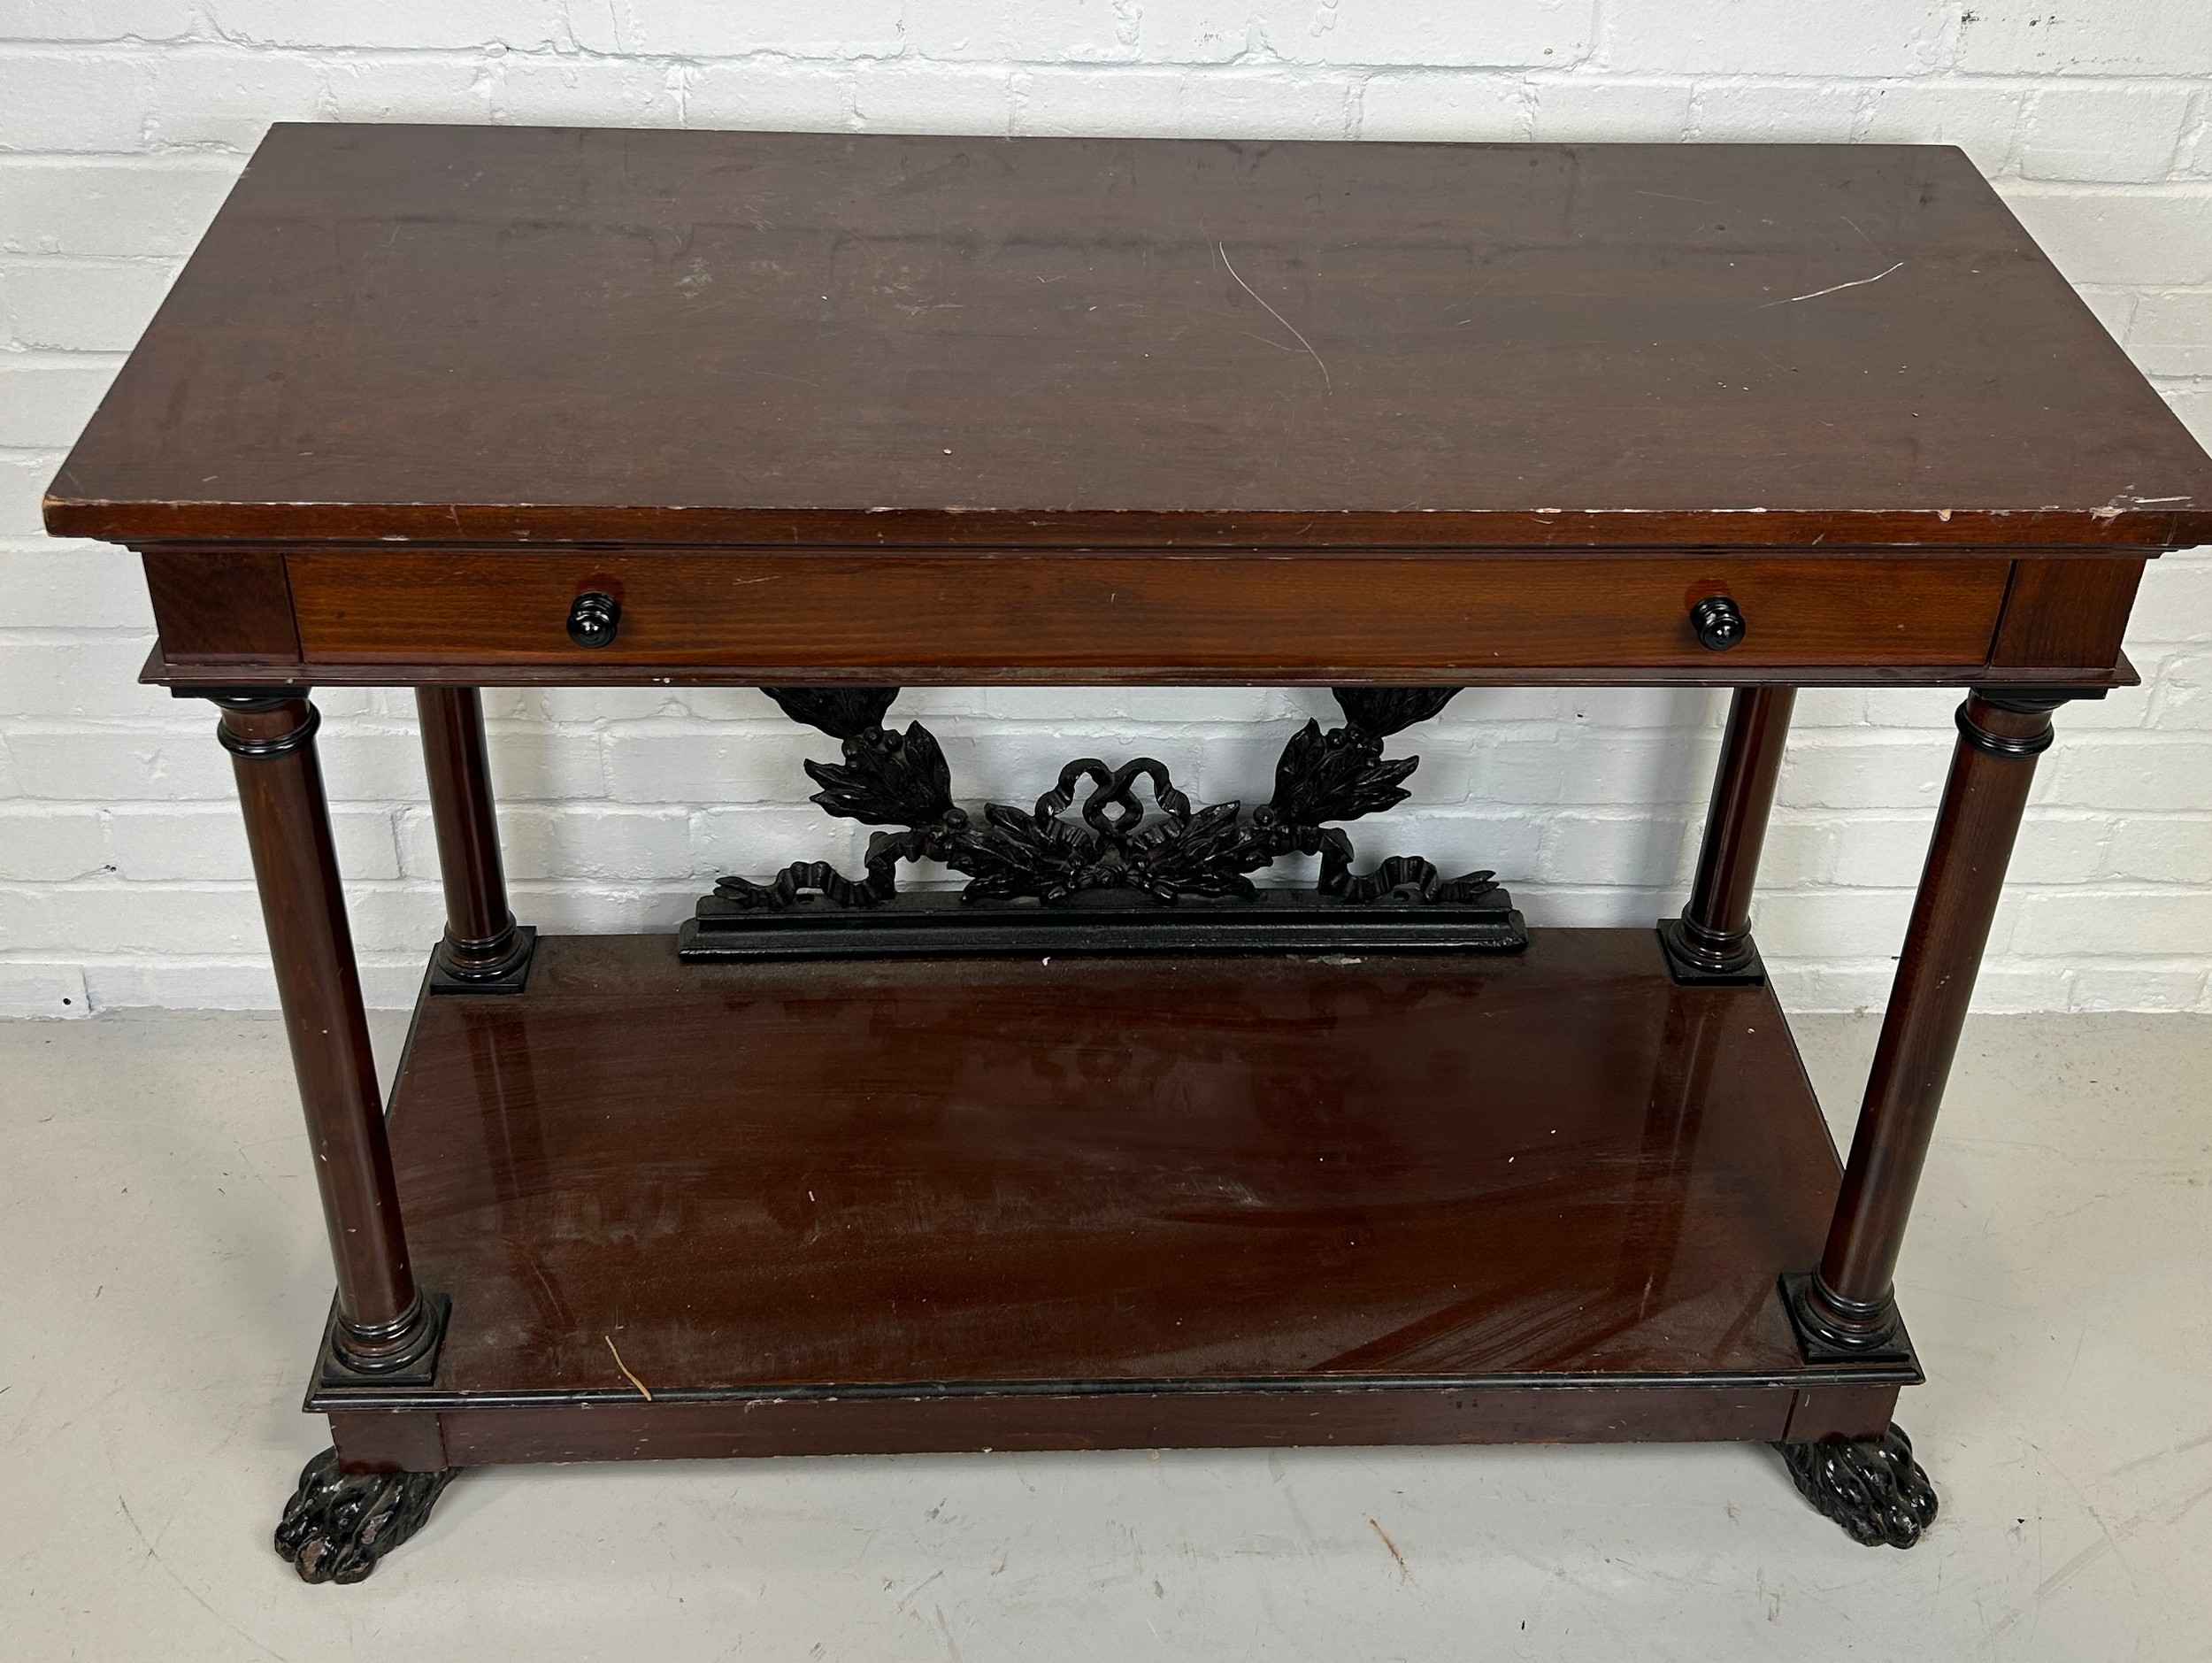 A REGENCY STYLE REPRODUCTION MAHOGANY CONSOLE TABLE WITH METAL WREATH, 108cm x 80cm x 46cm - Image 3 of 5